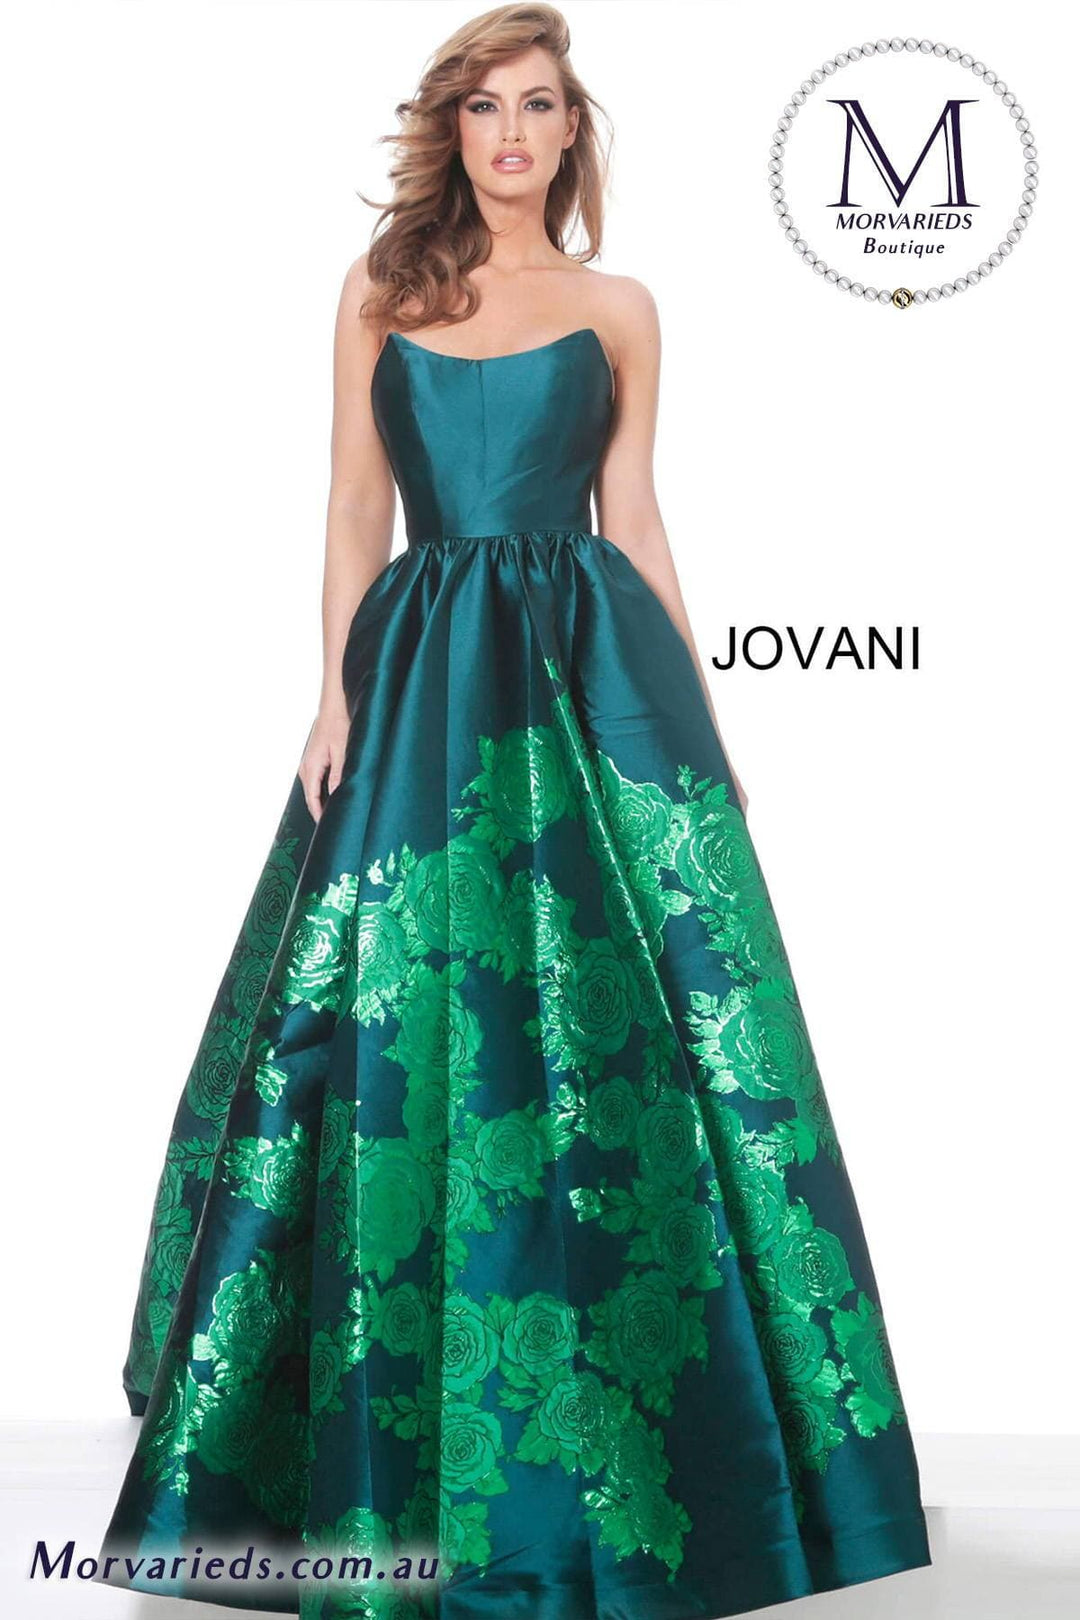 Strapless Pleated Skirt Prom Gown Jovani 02038 - Morvarieds Boutique